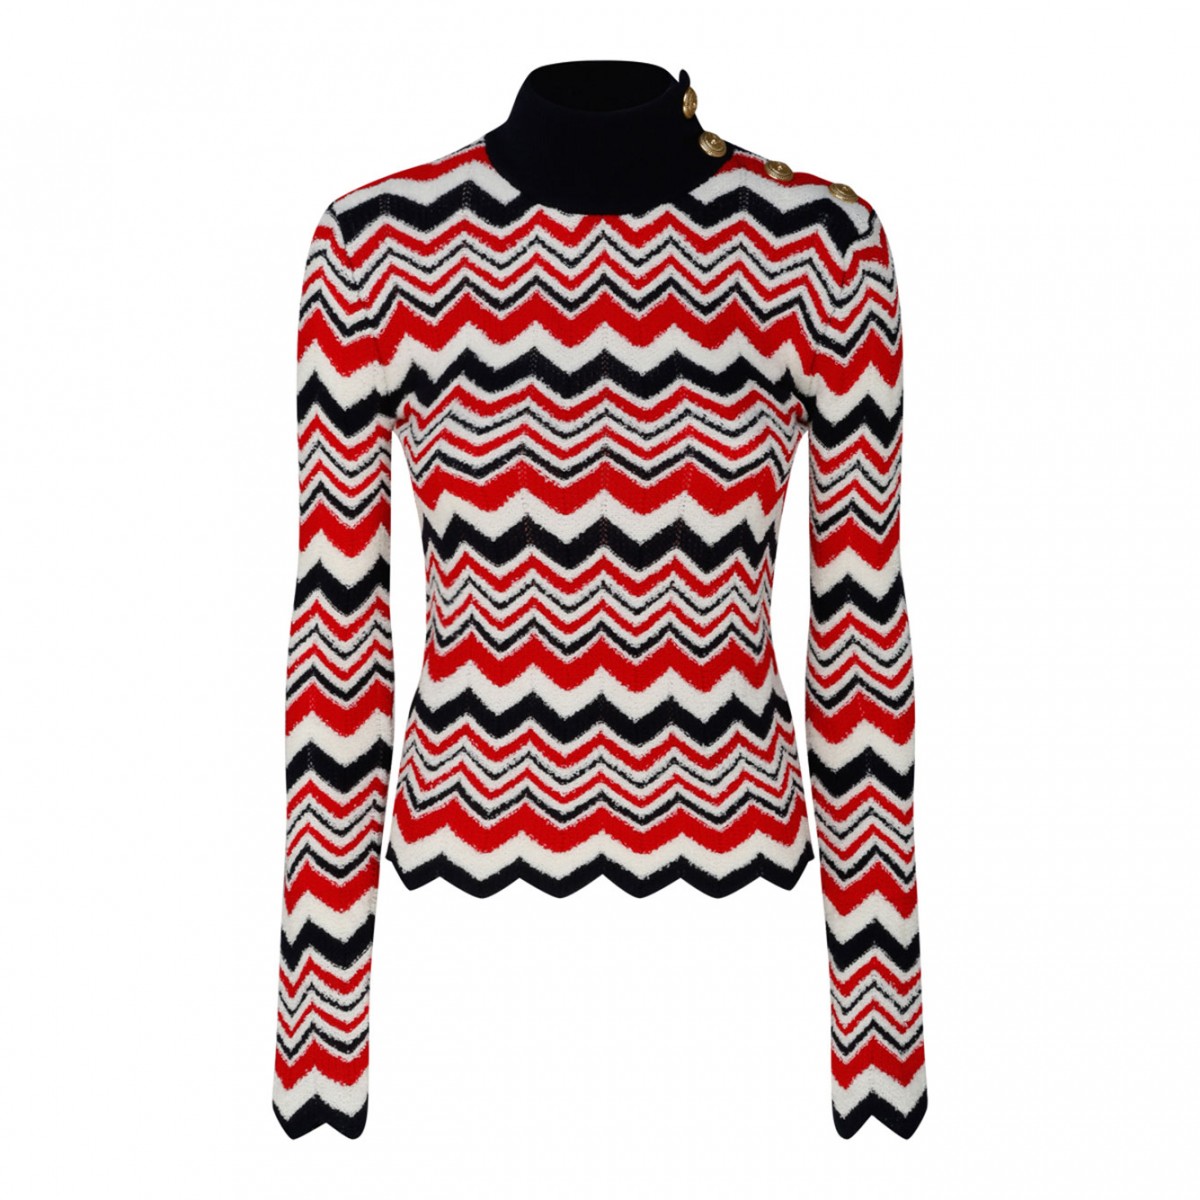 Red, White and Black Virgin Wool Chevron Knit Jumper